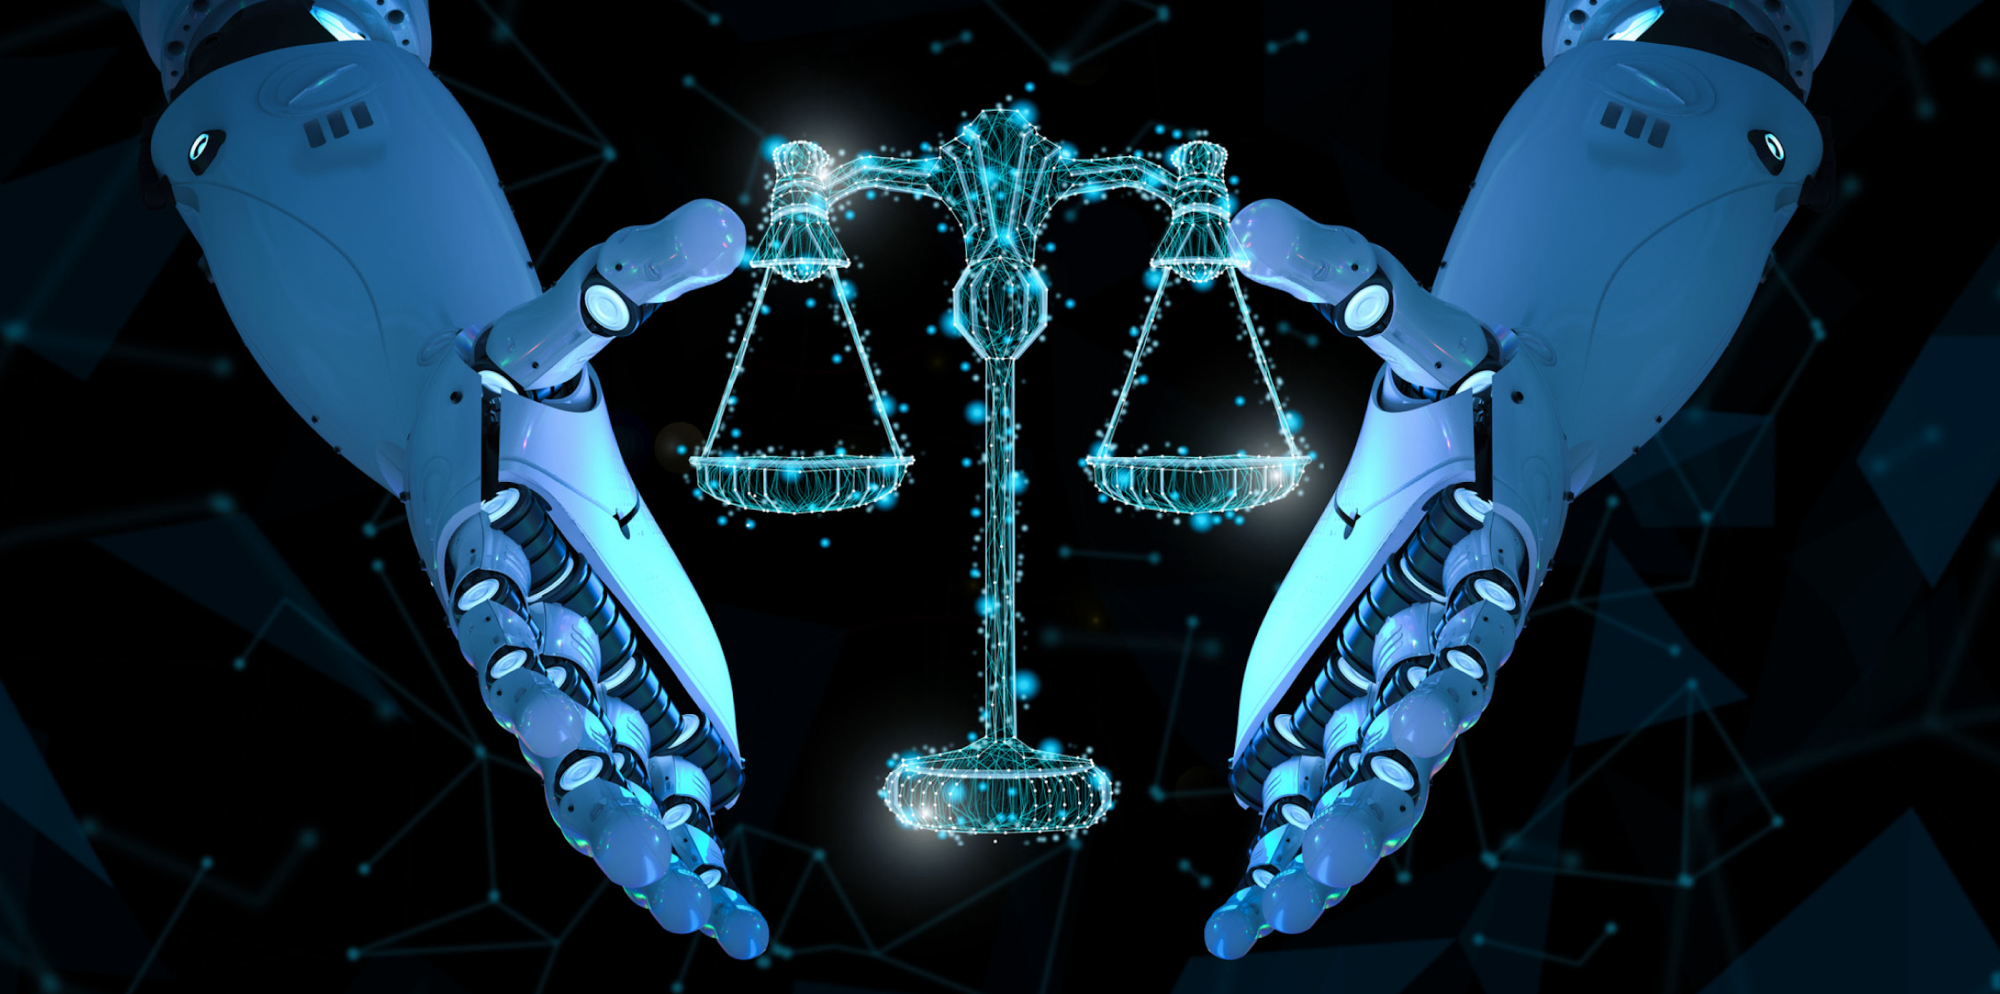 Robot hands and Scales of Justice 